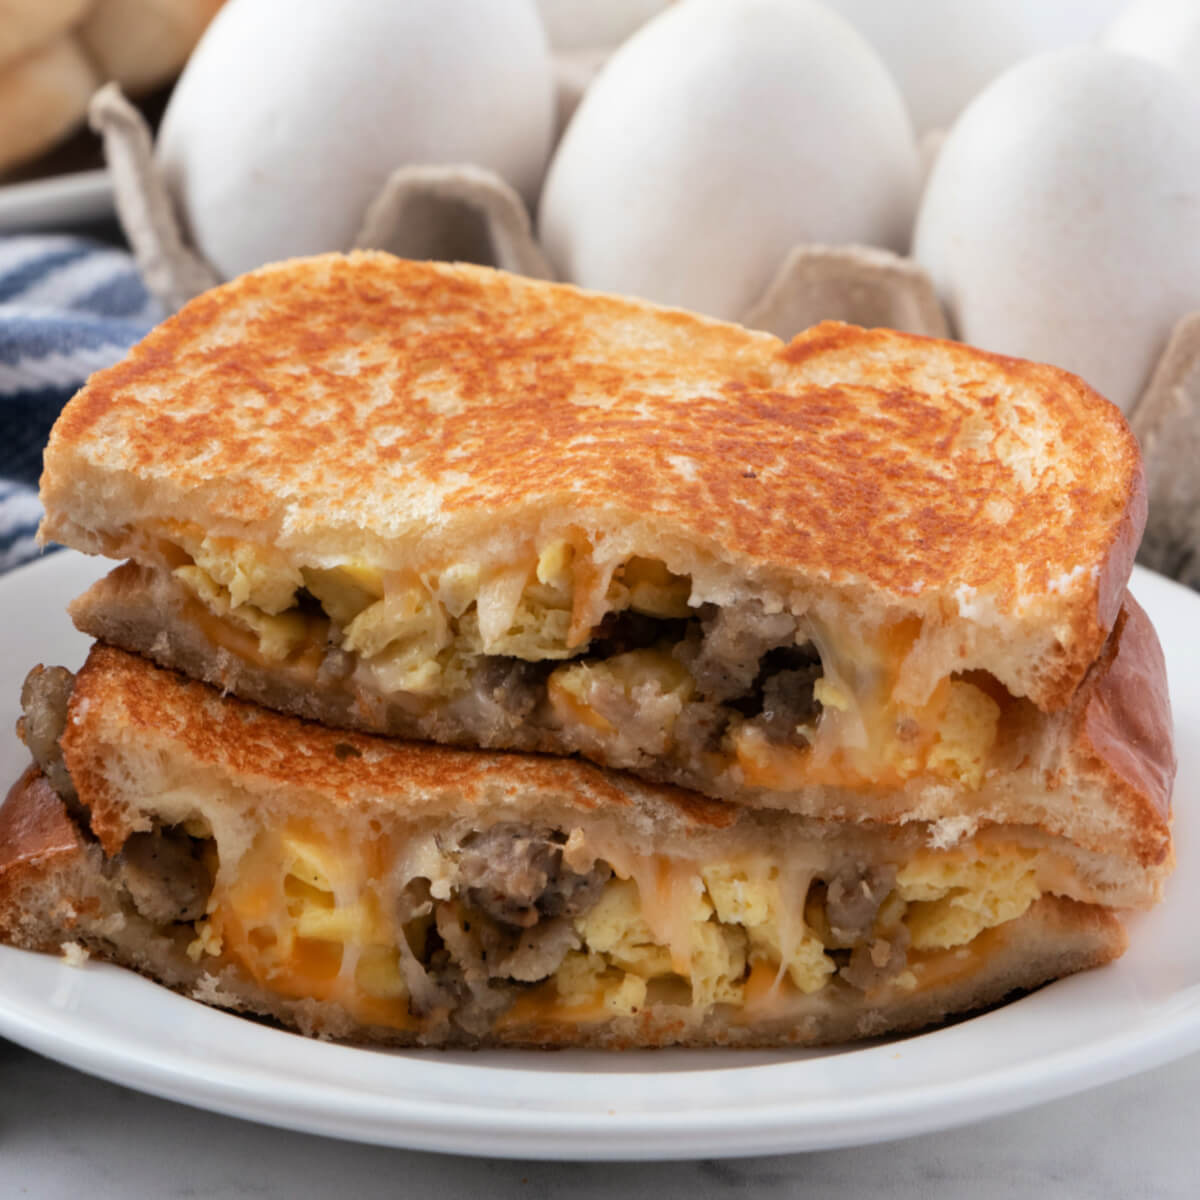 The Best Sausage Egg and Cheese Breakfast Sandwich